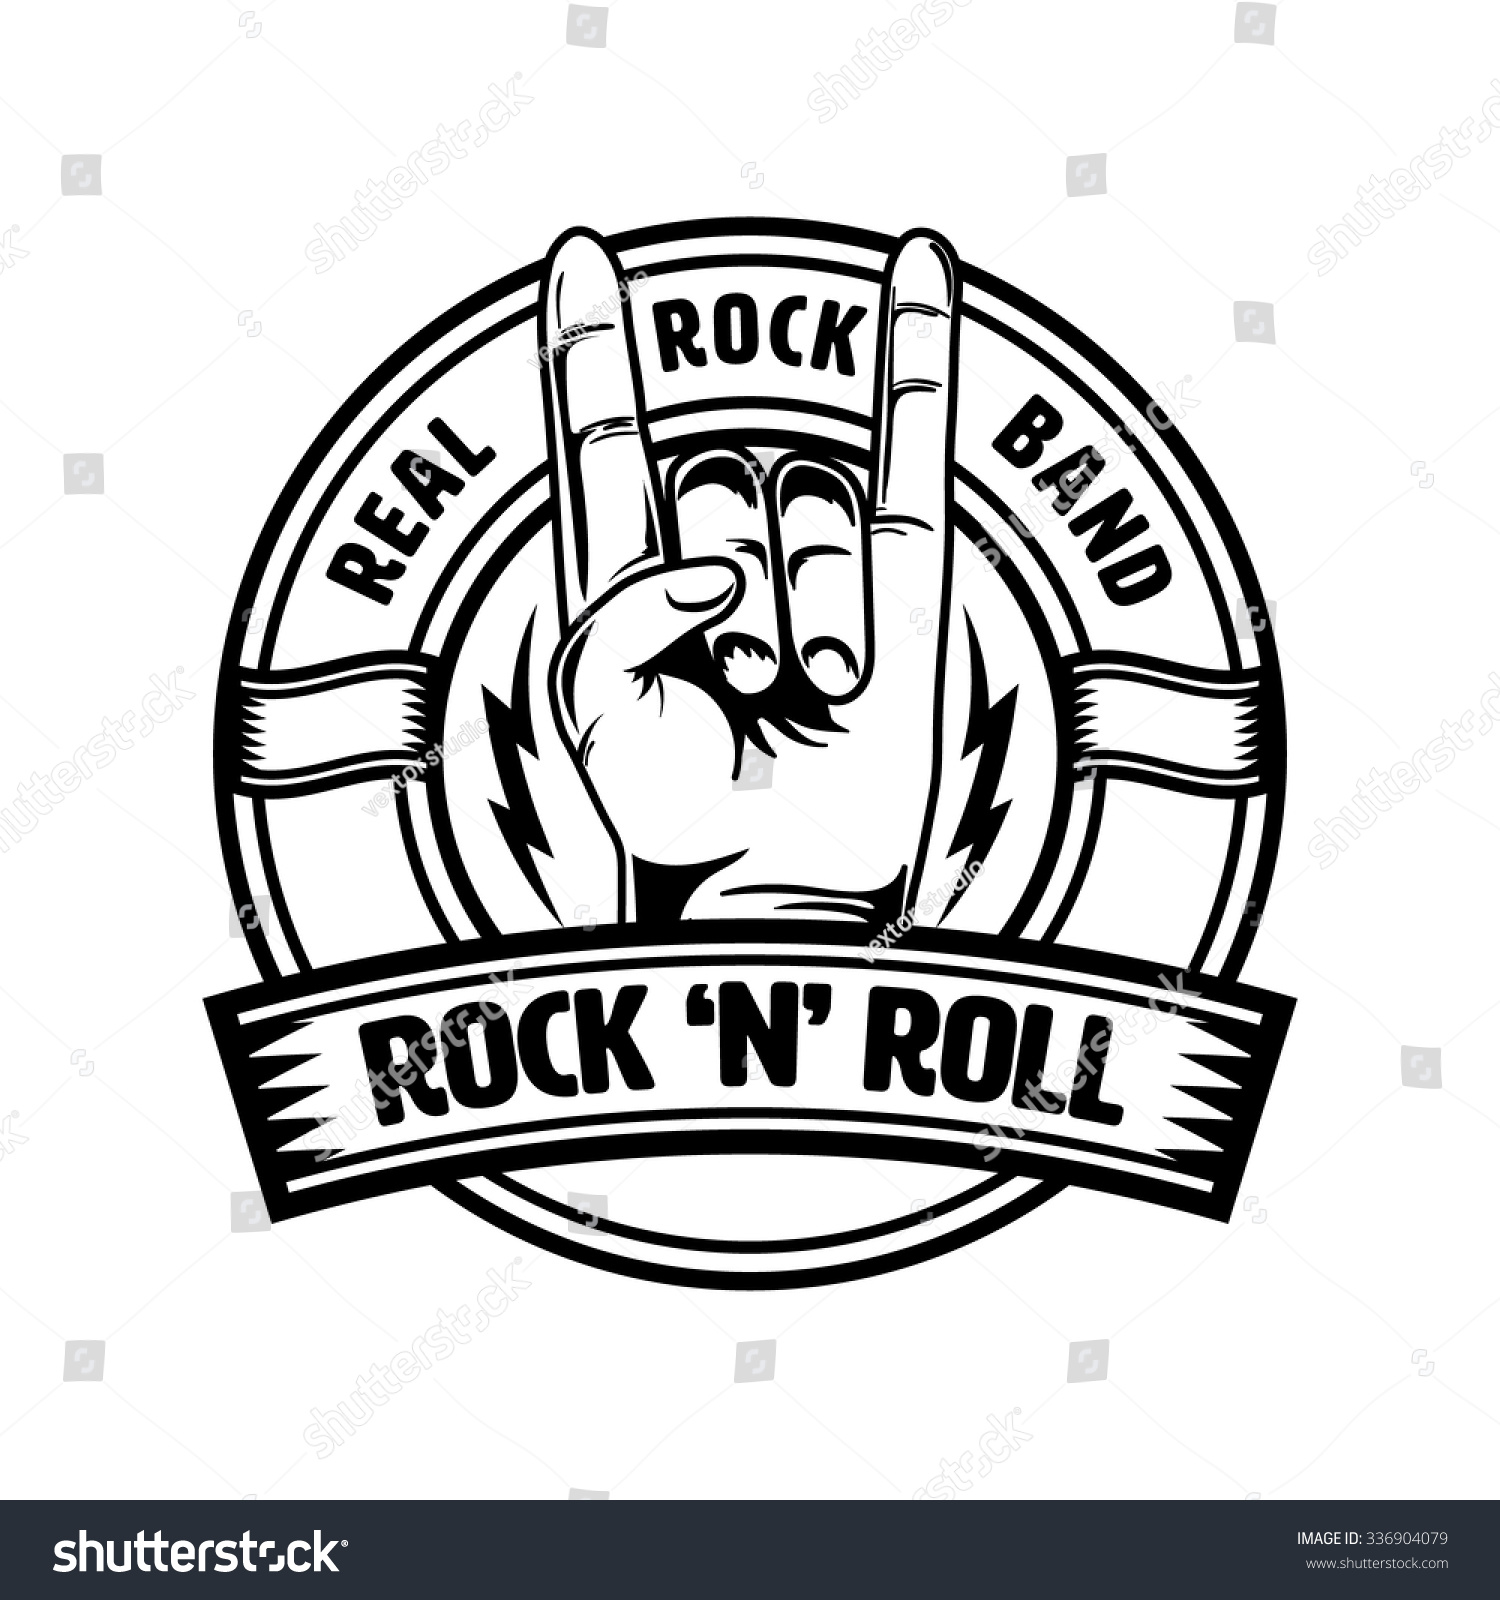 Rock And Roll Graphic For T-Shirt,Poster,Sticker,Tattoo Stock Vector ...